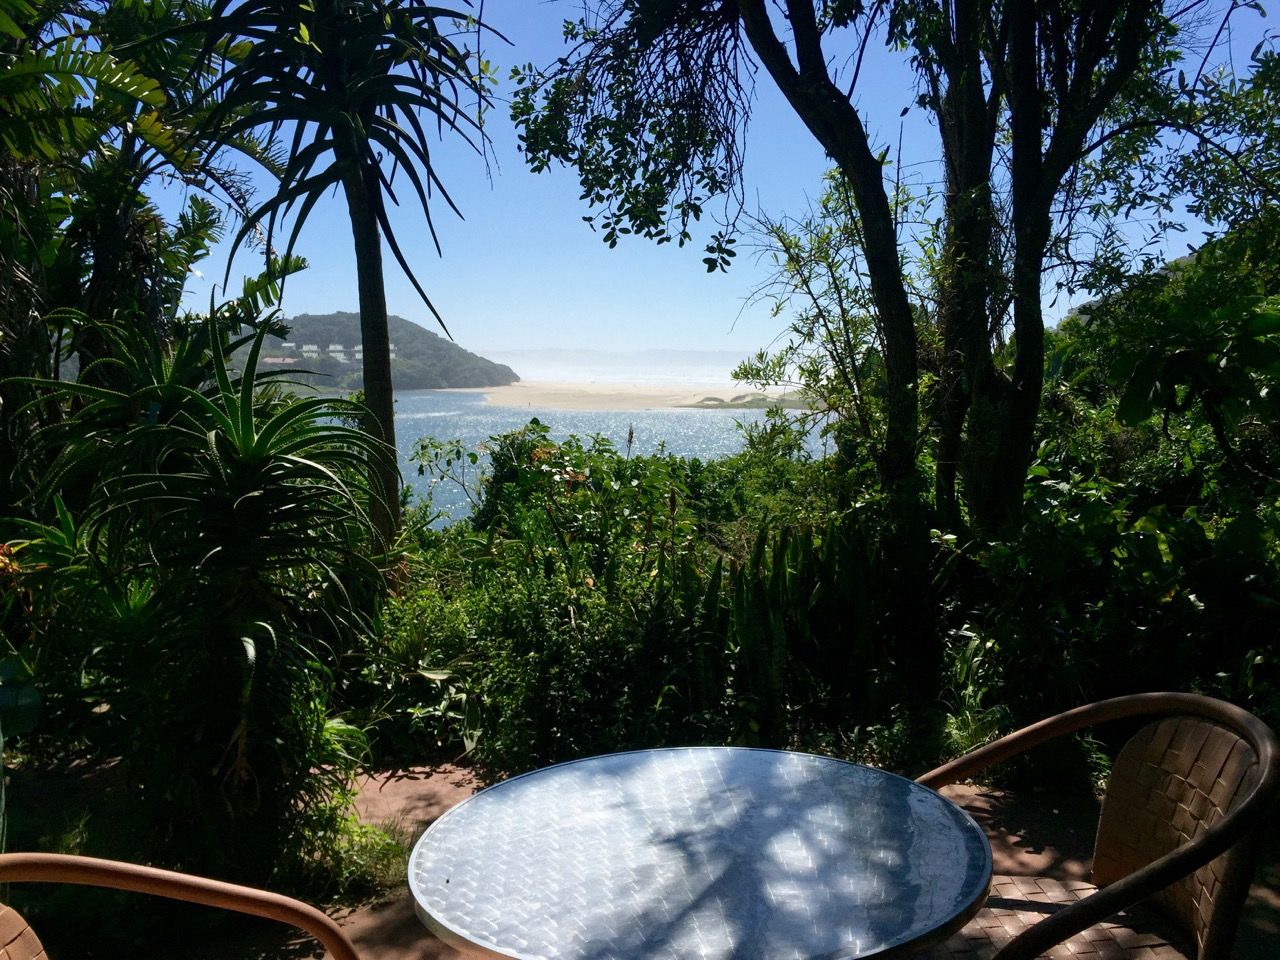 Overlooking Cintsa Bay from a hut at Buccaneers lodge.